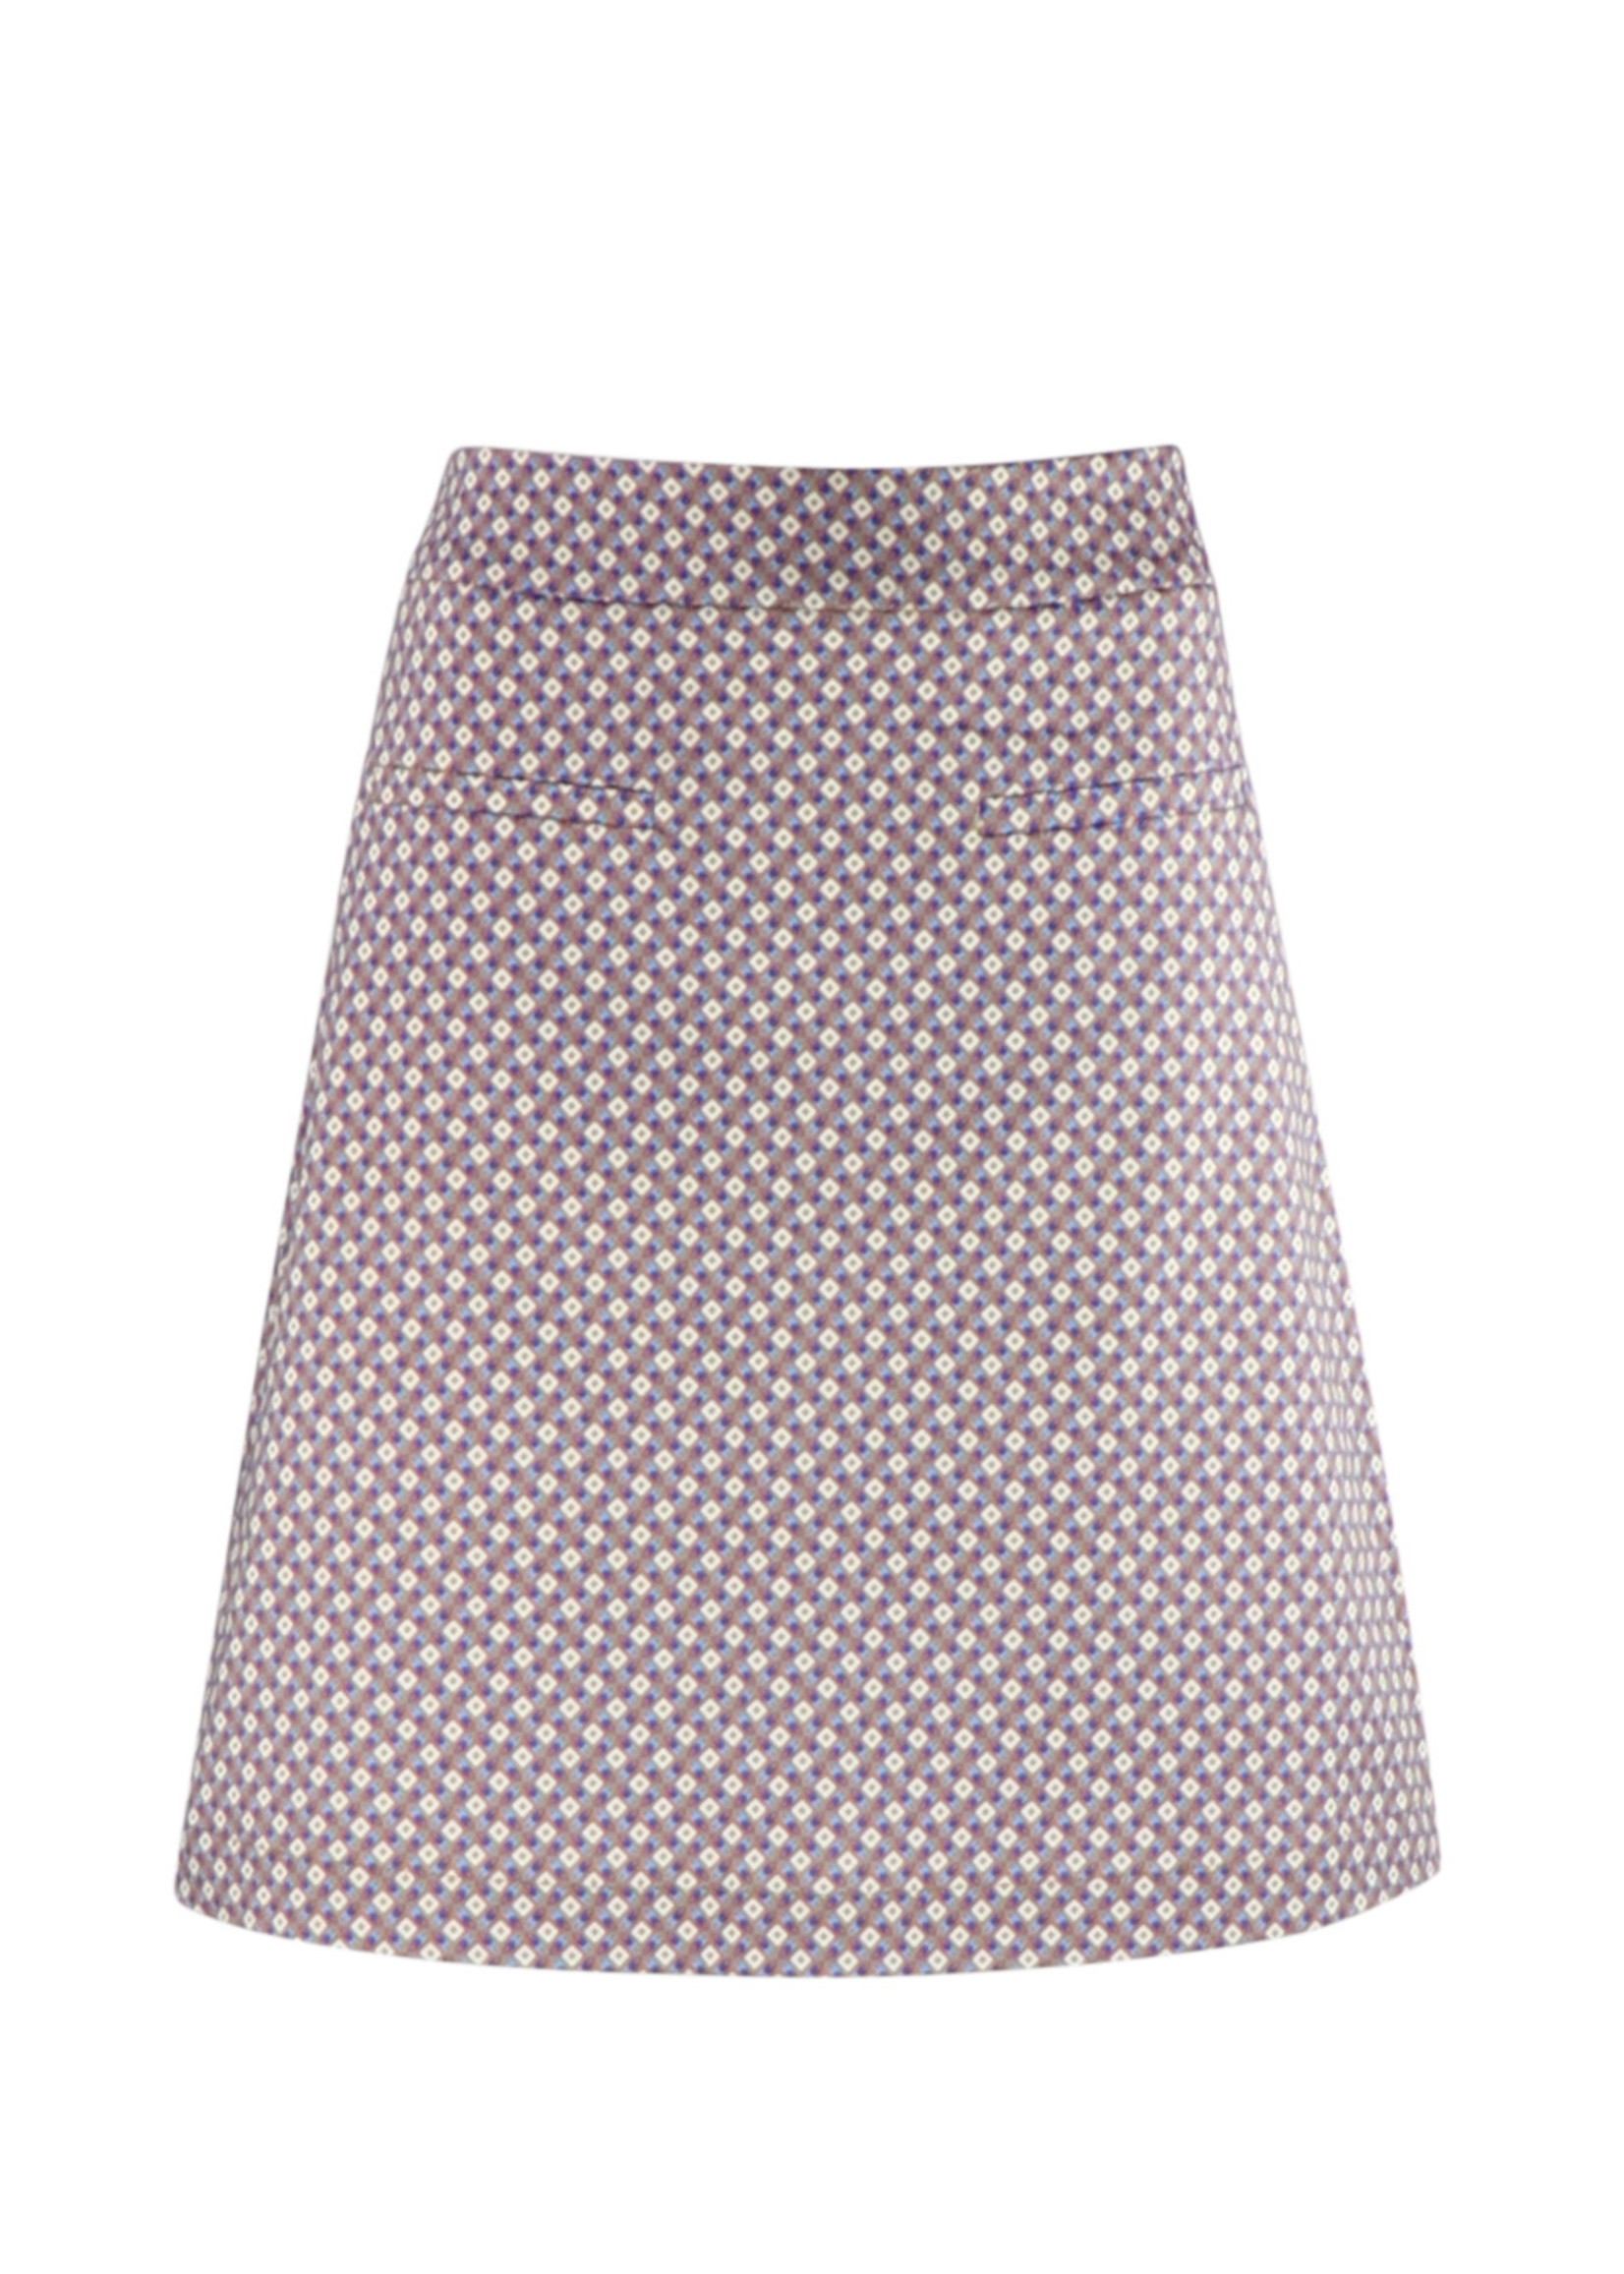 Zilch Patterned Cotton Skirt